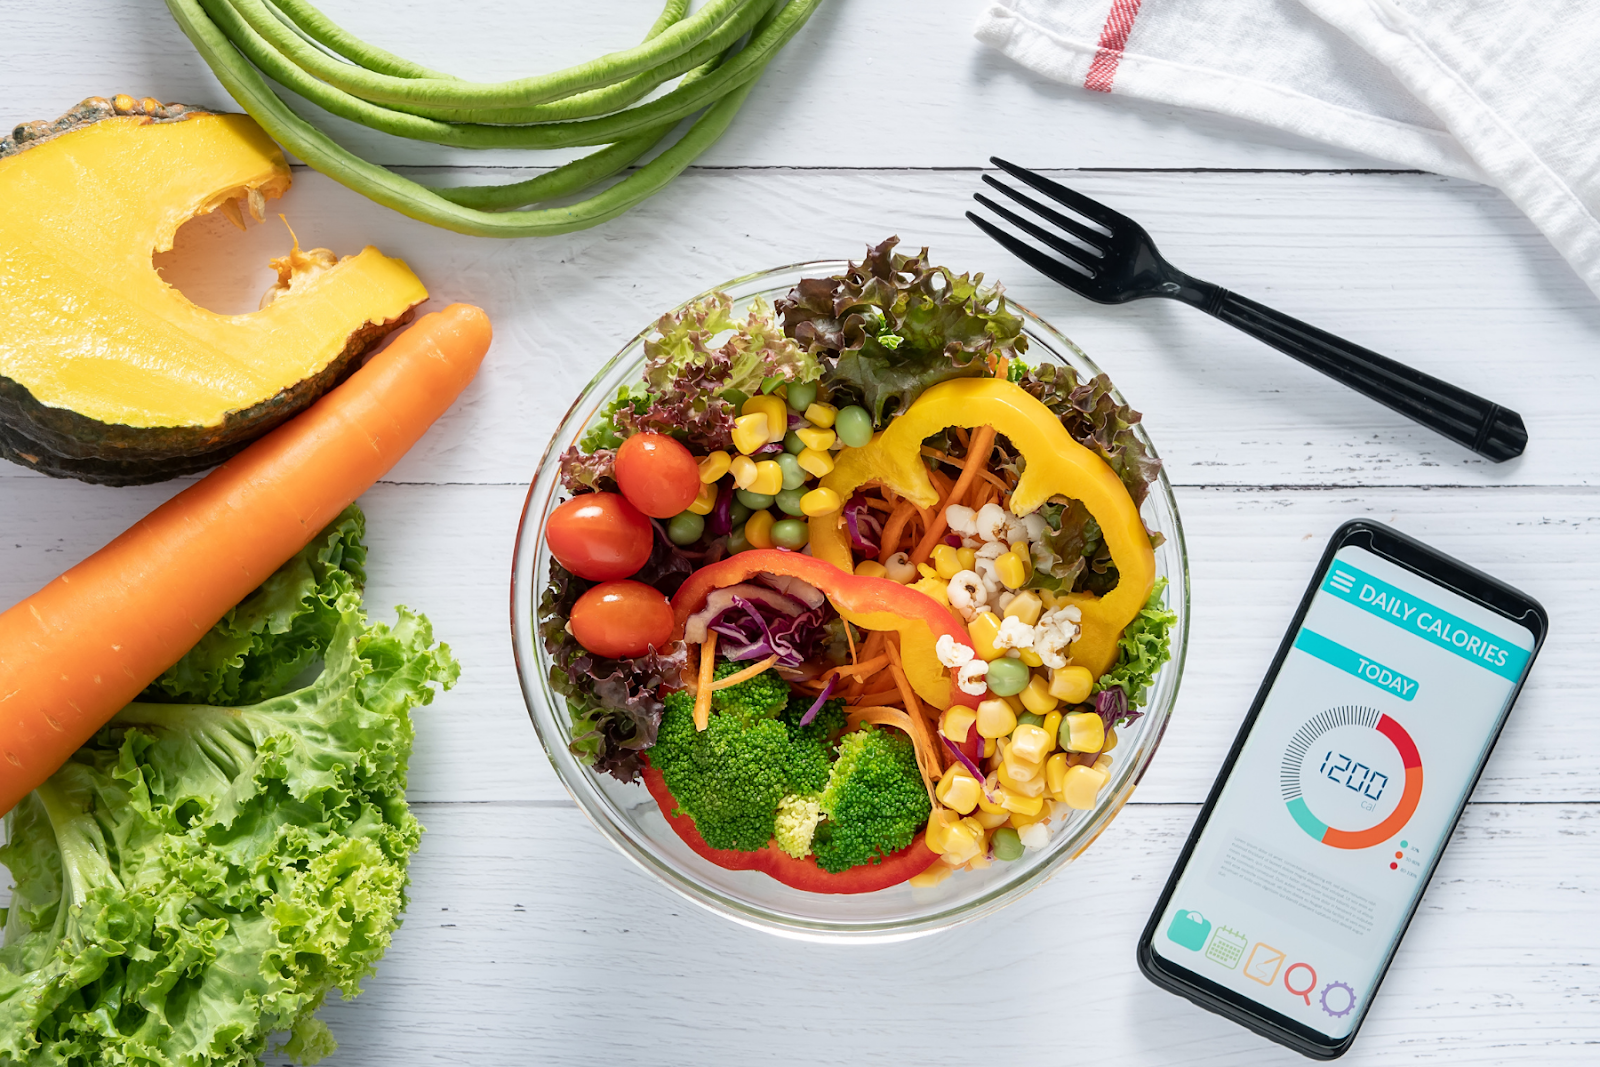 Overhead view of a bowl of salad and a phone with a calorie tracking app open reading 1200 calories. 